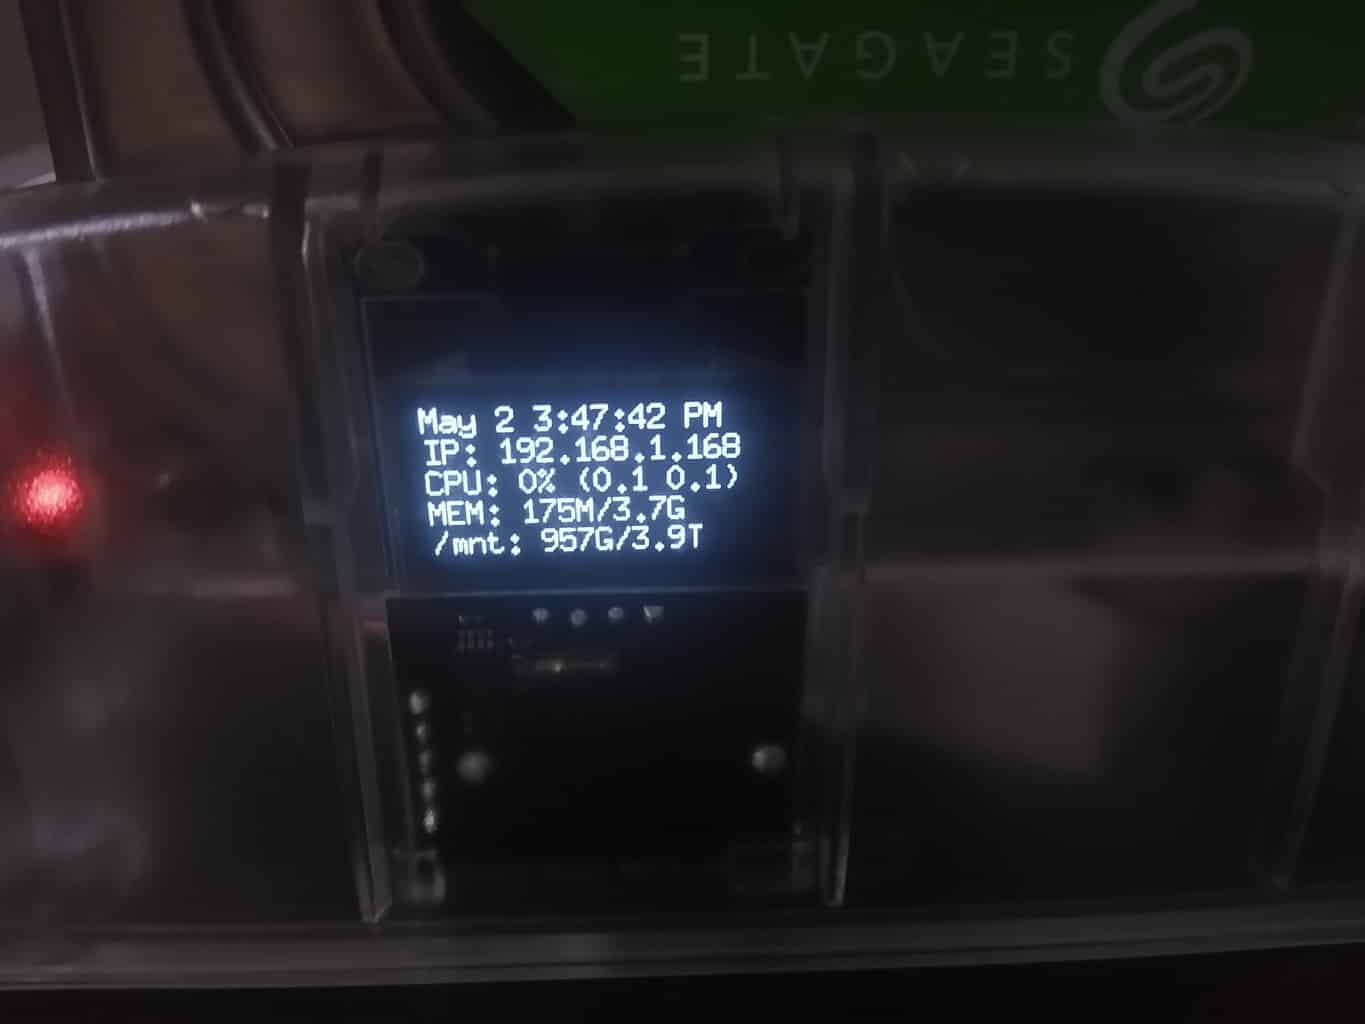 the OLED display with system stats showing